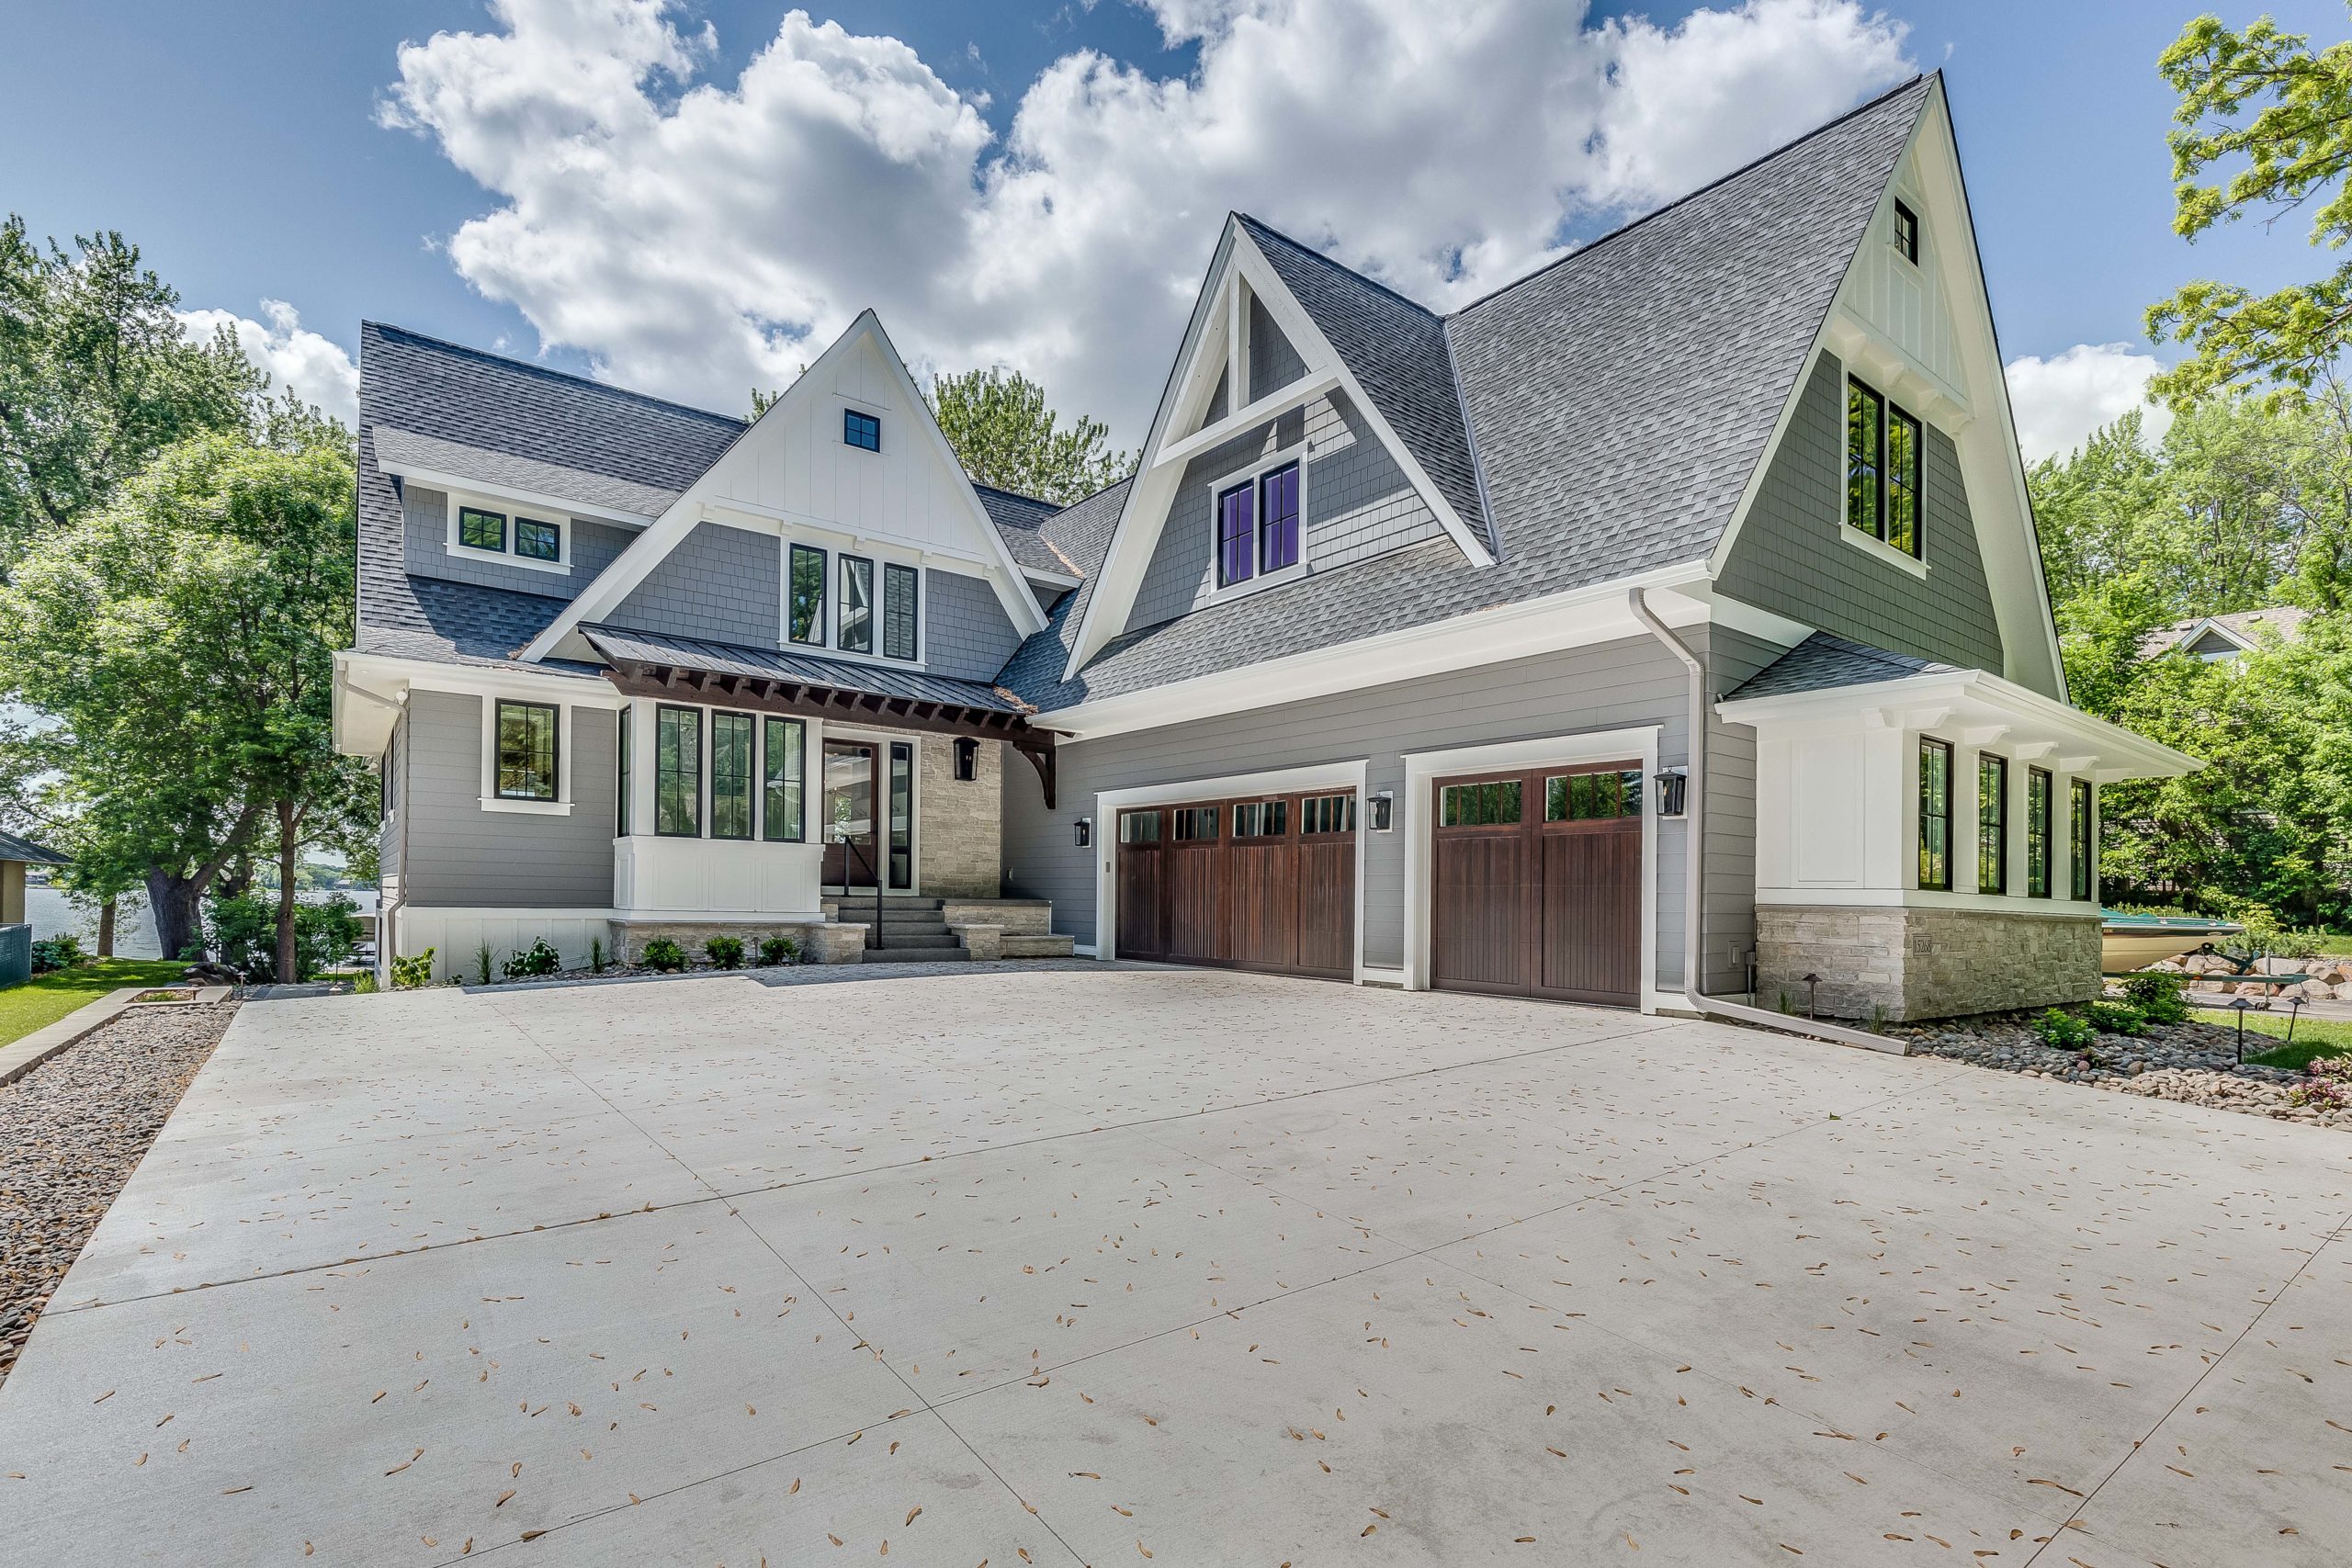 Light gray two story lake home with large gables.